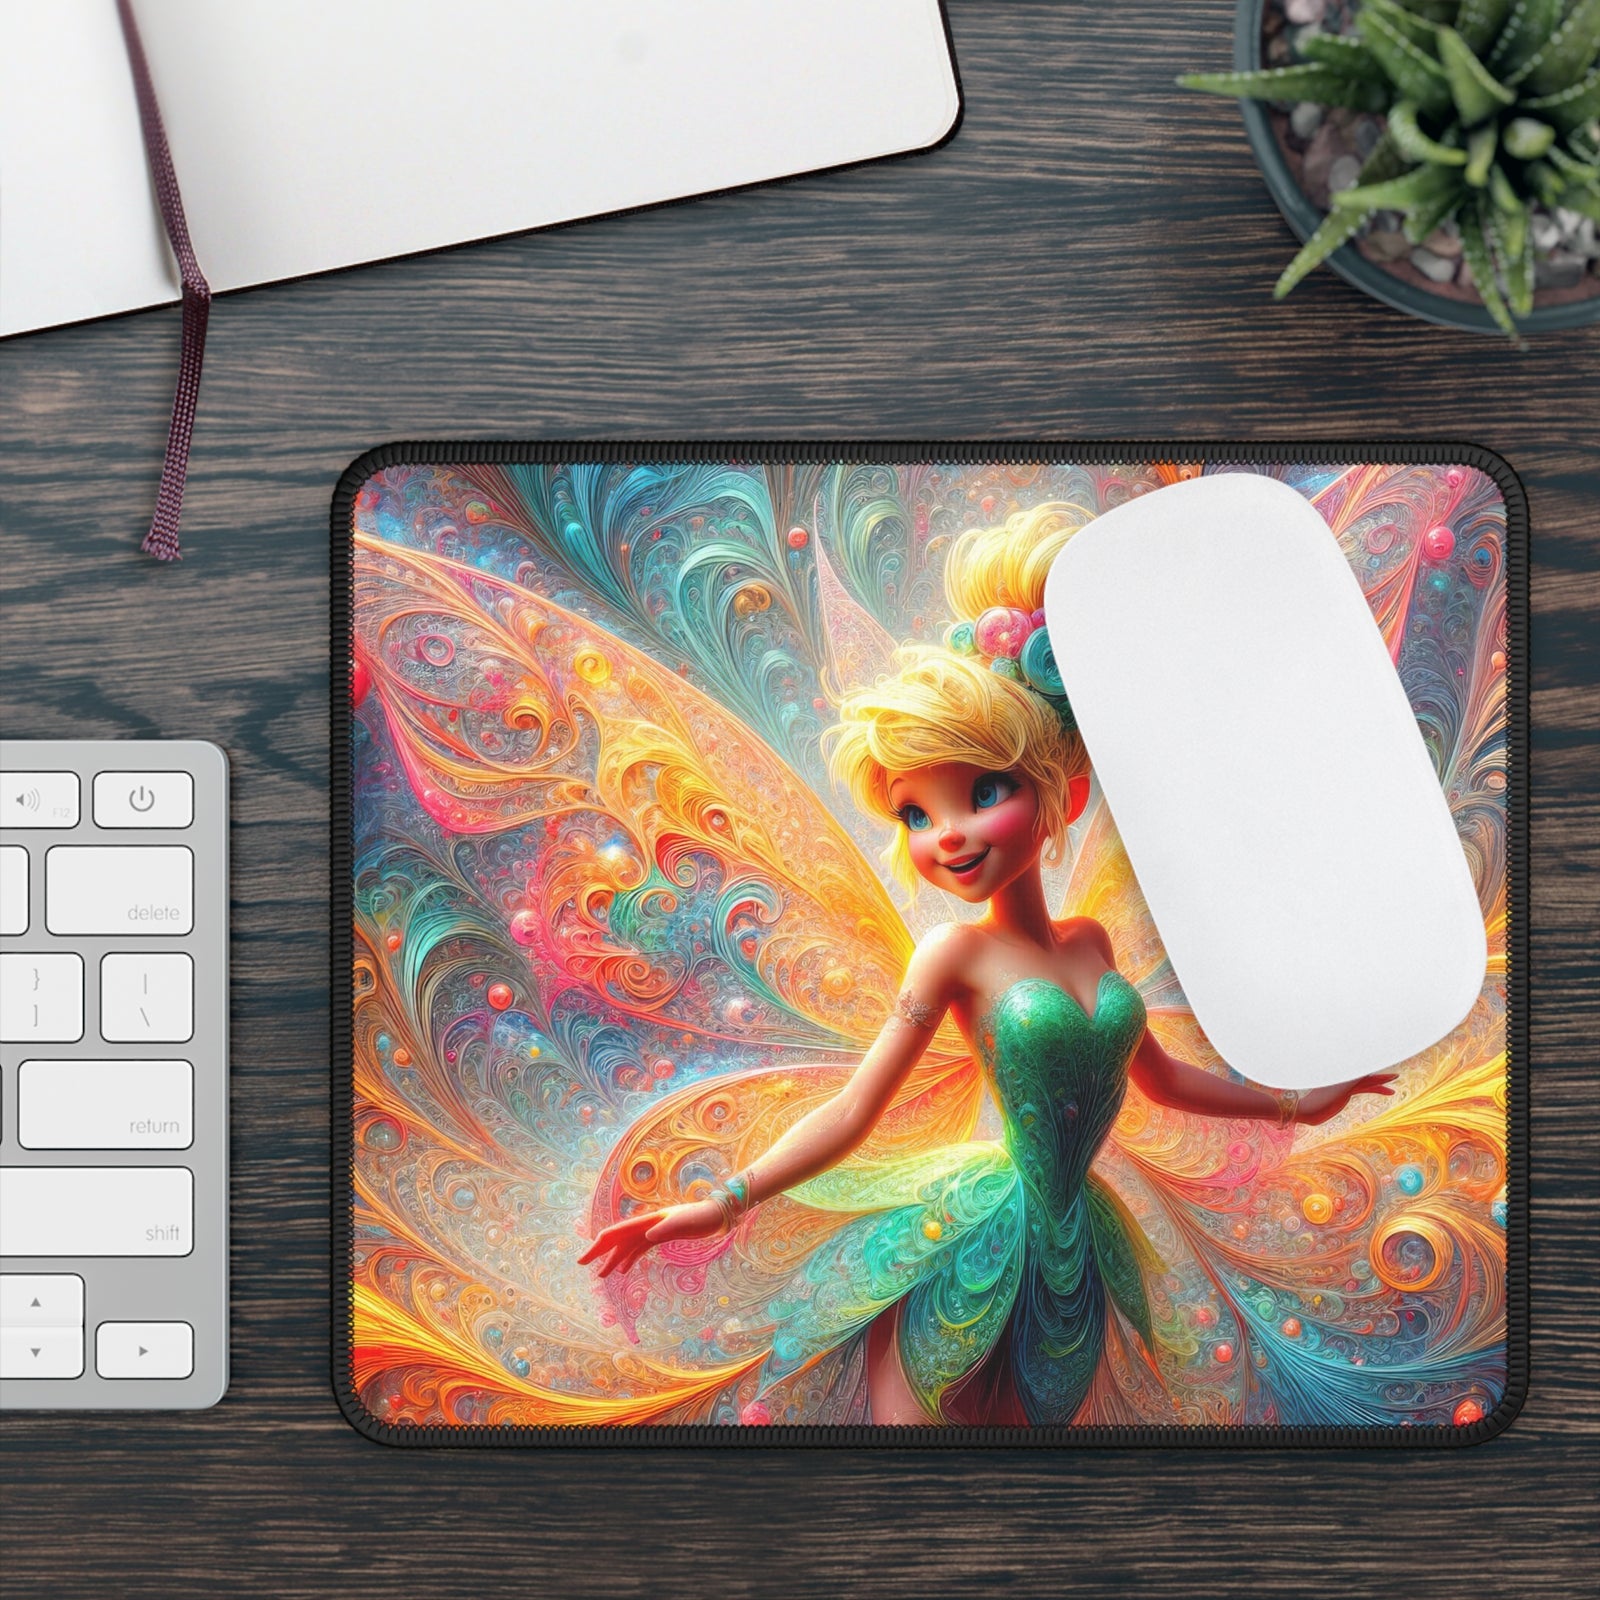 Dance of the Sunlit Fairy Mouse Pad